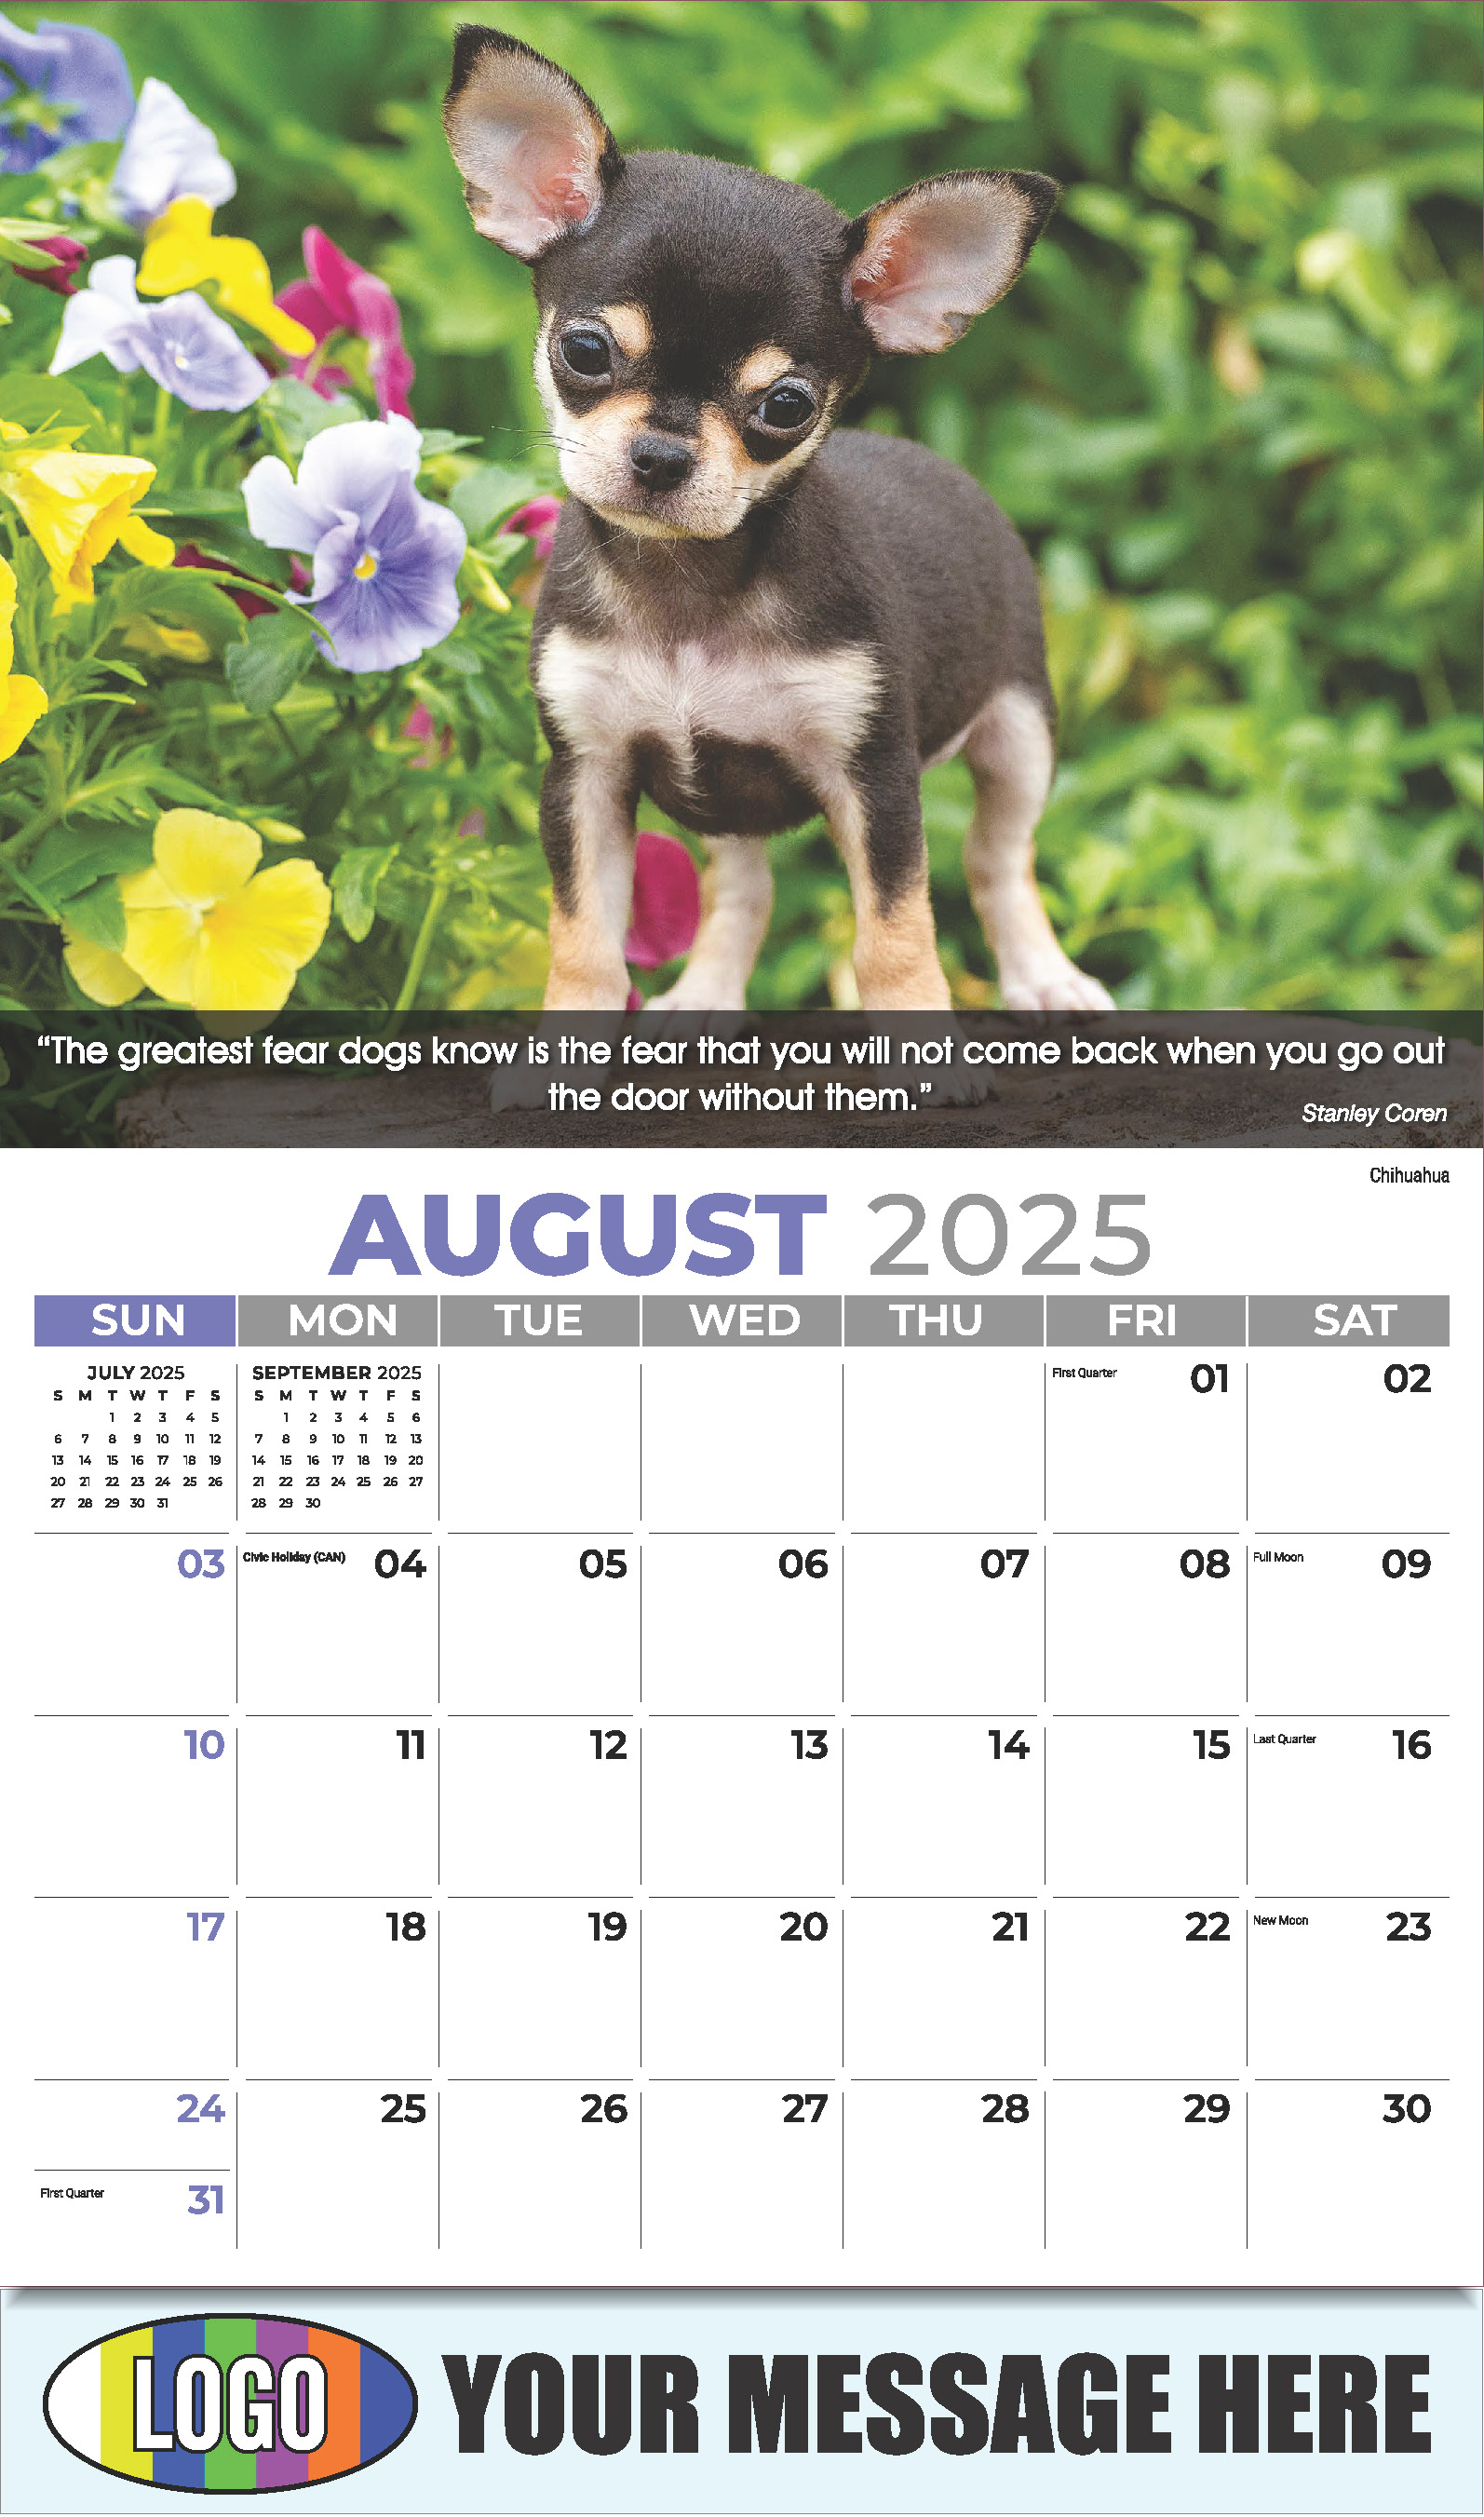 Dogs 2025 Vets and Pets Business Promotion Calendar - August